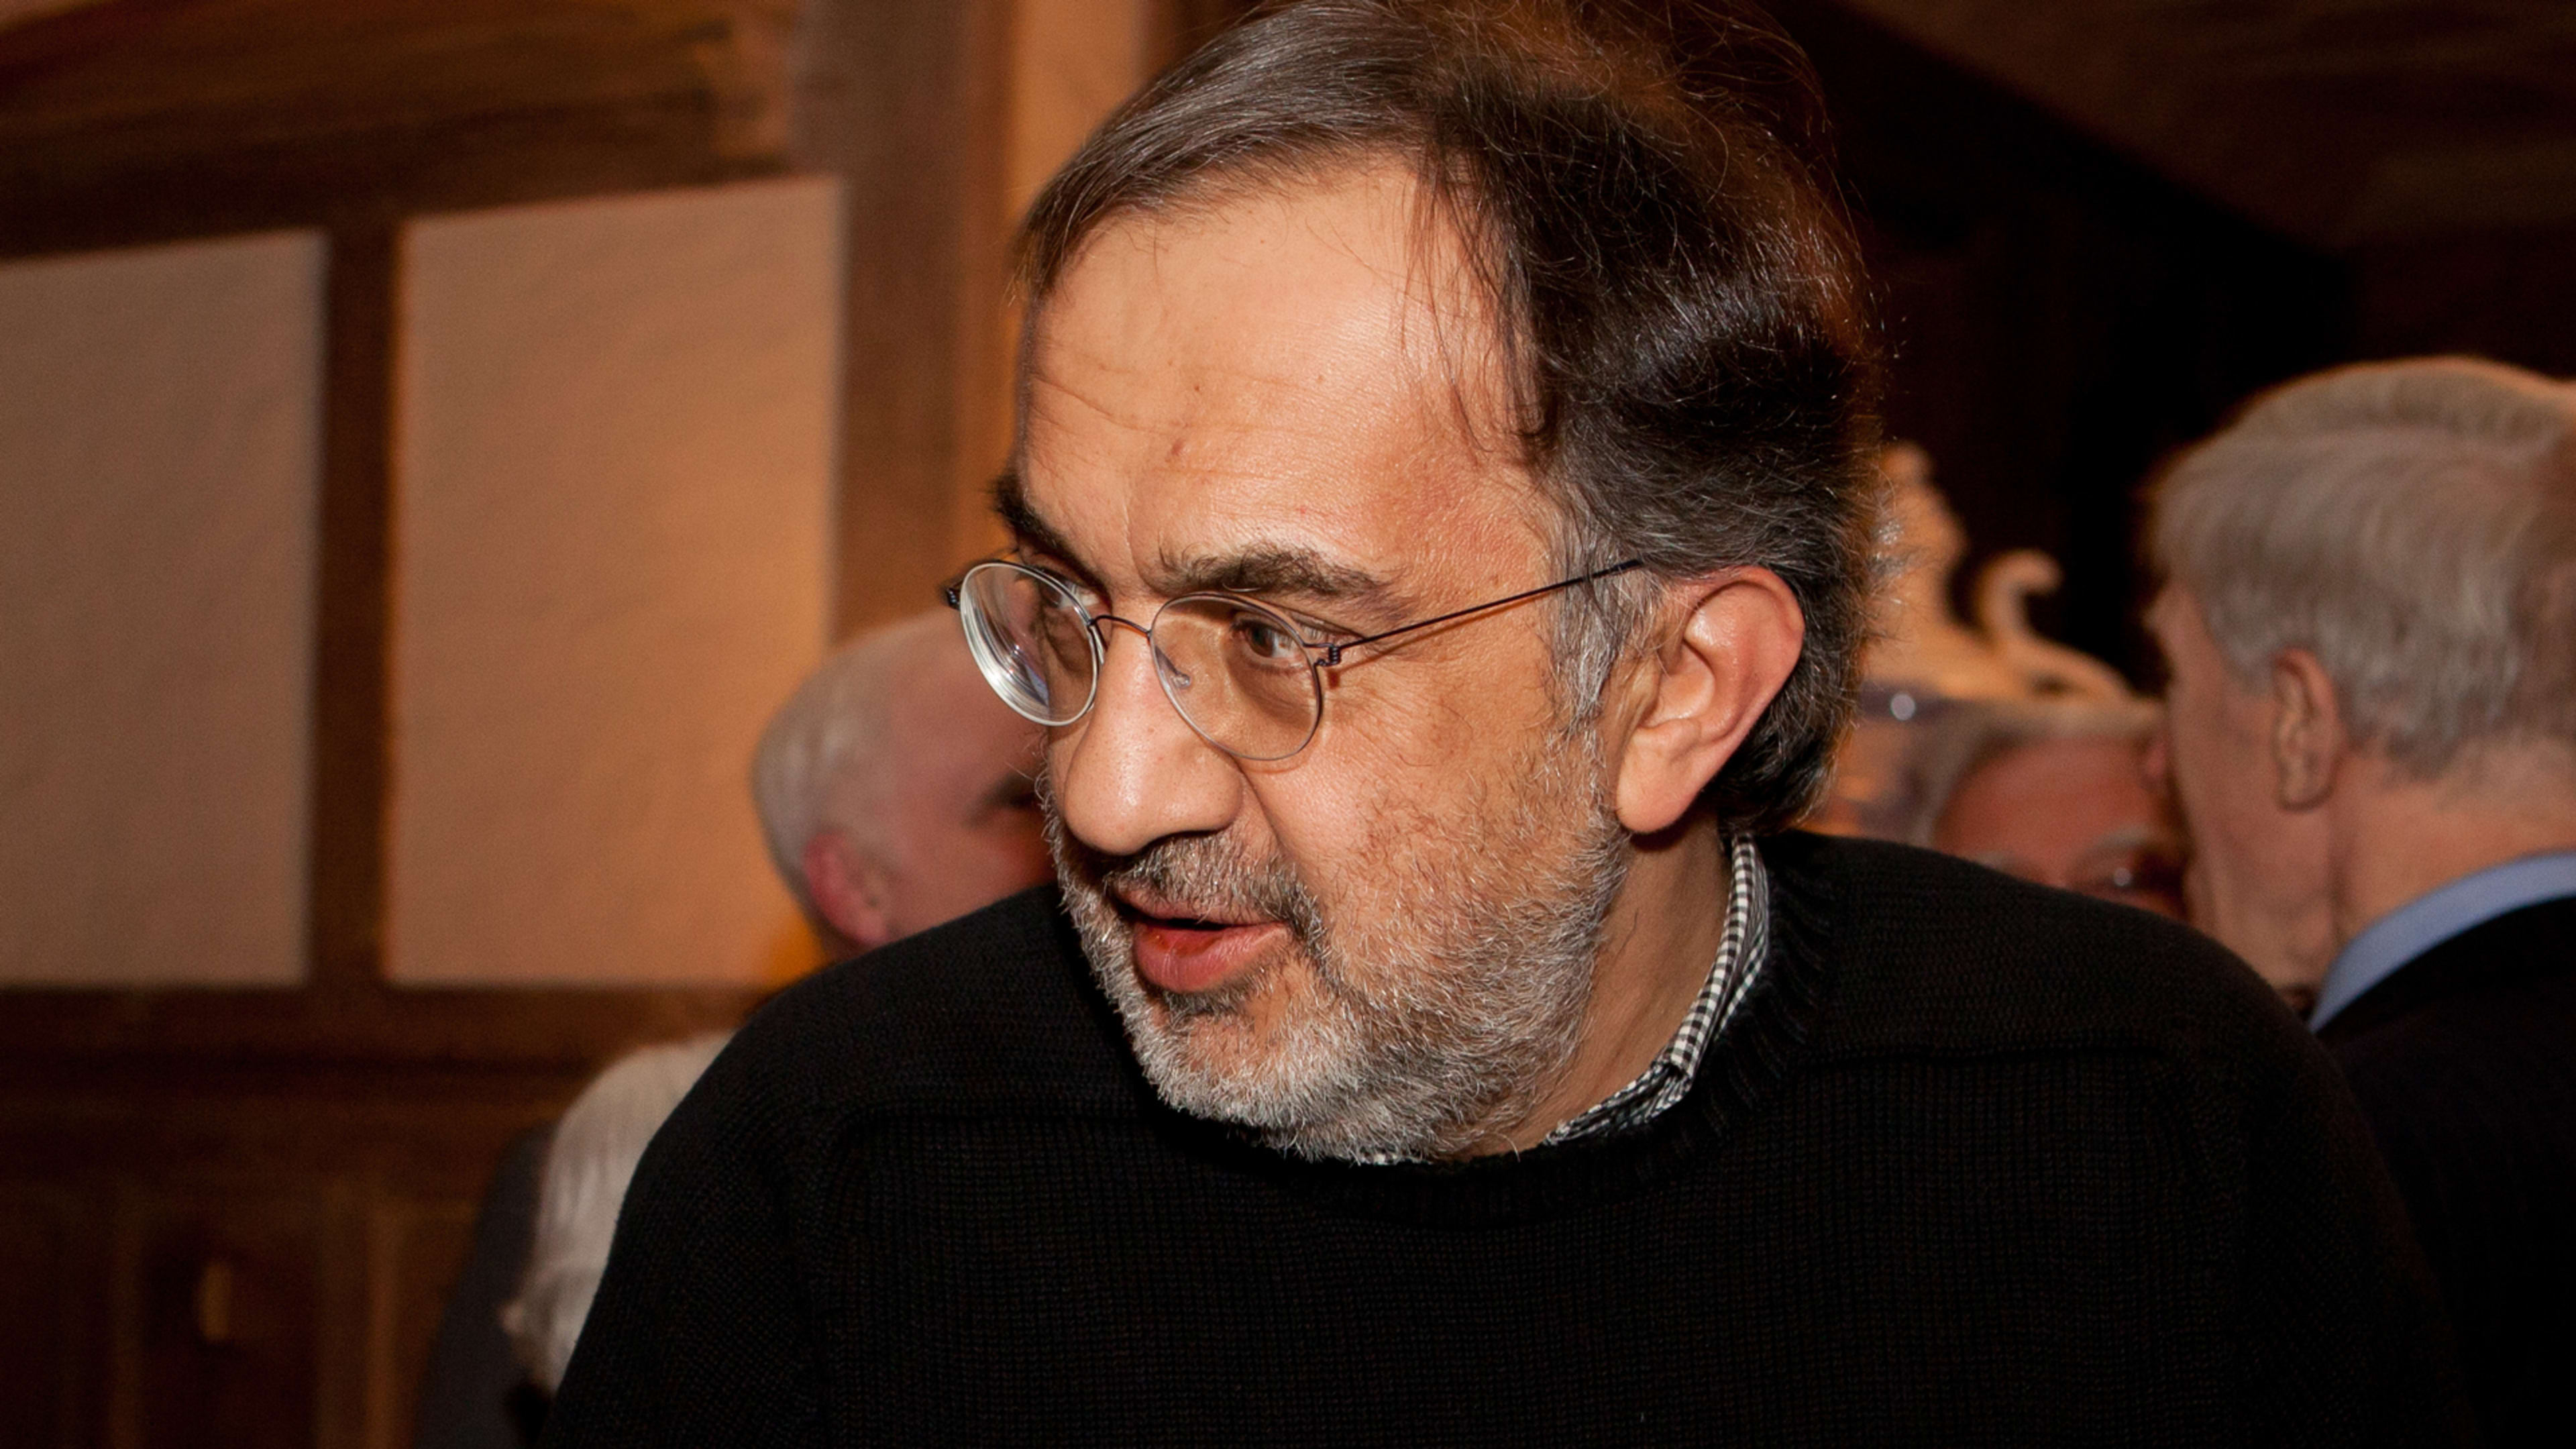 Sergio Marchionne, the architect of Fiat Chrysler’s turnaround, has died at 66